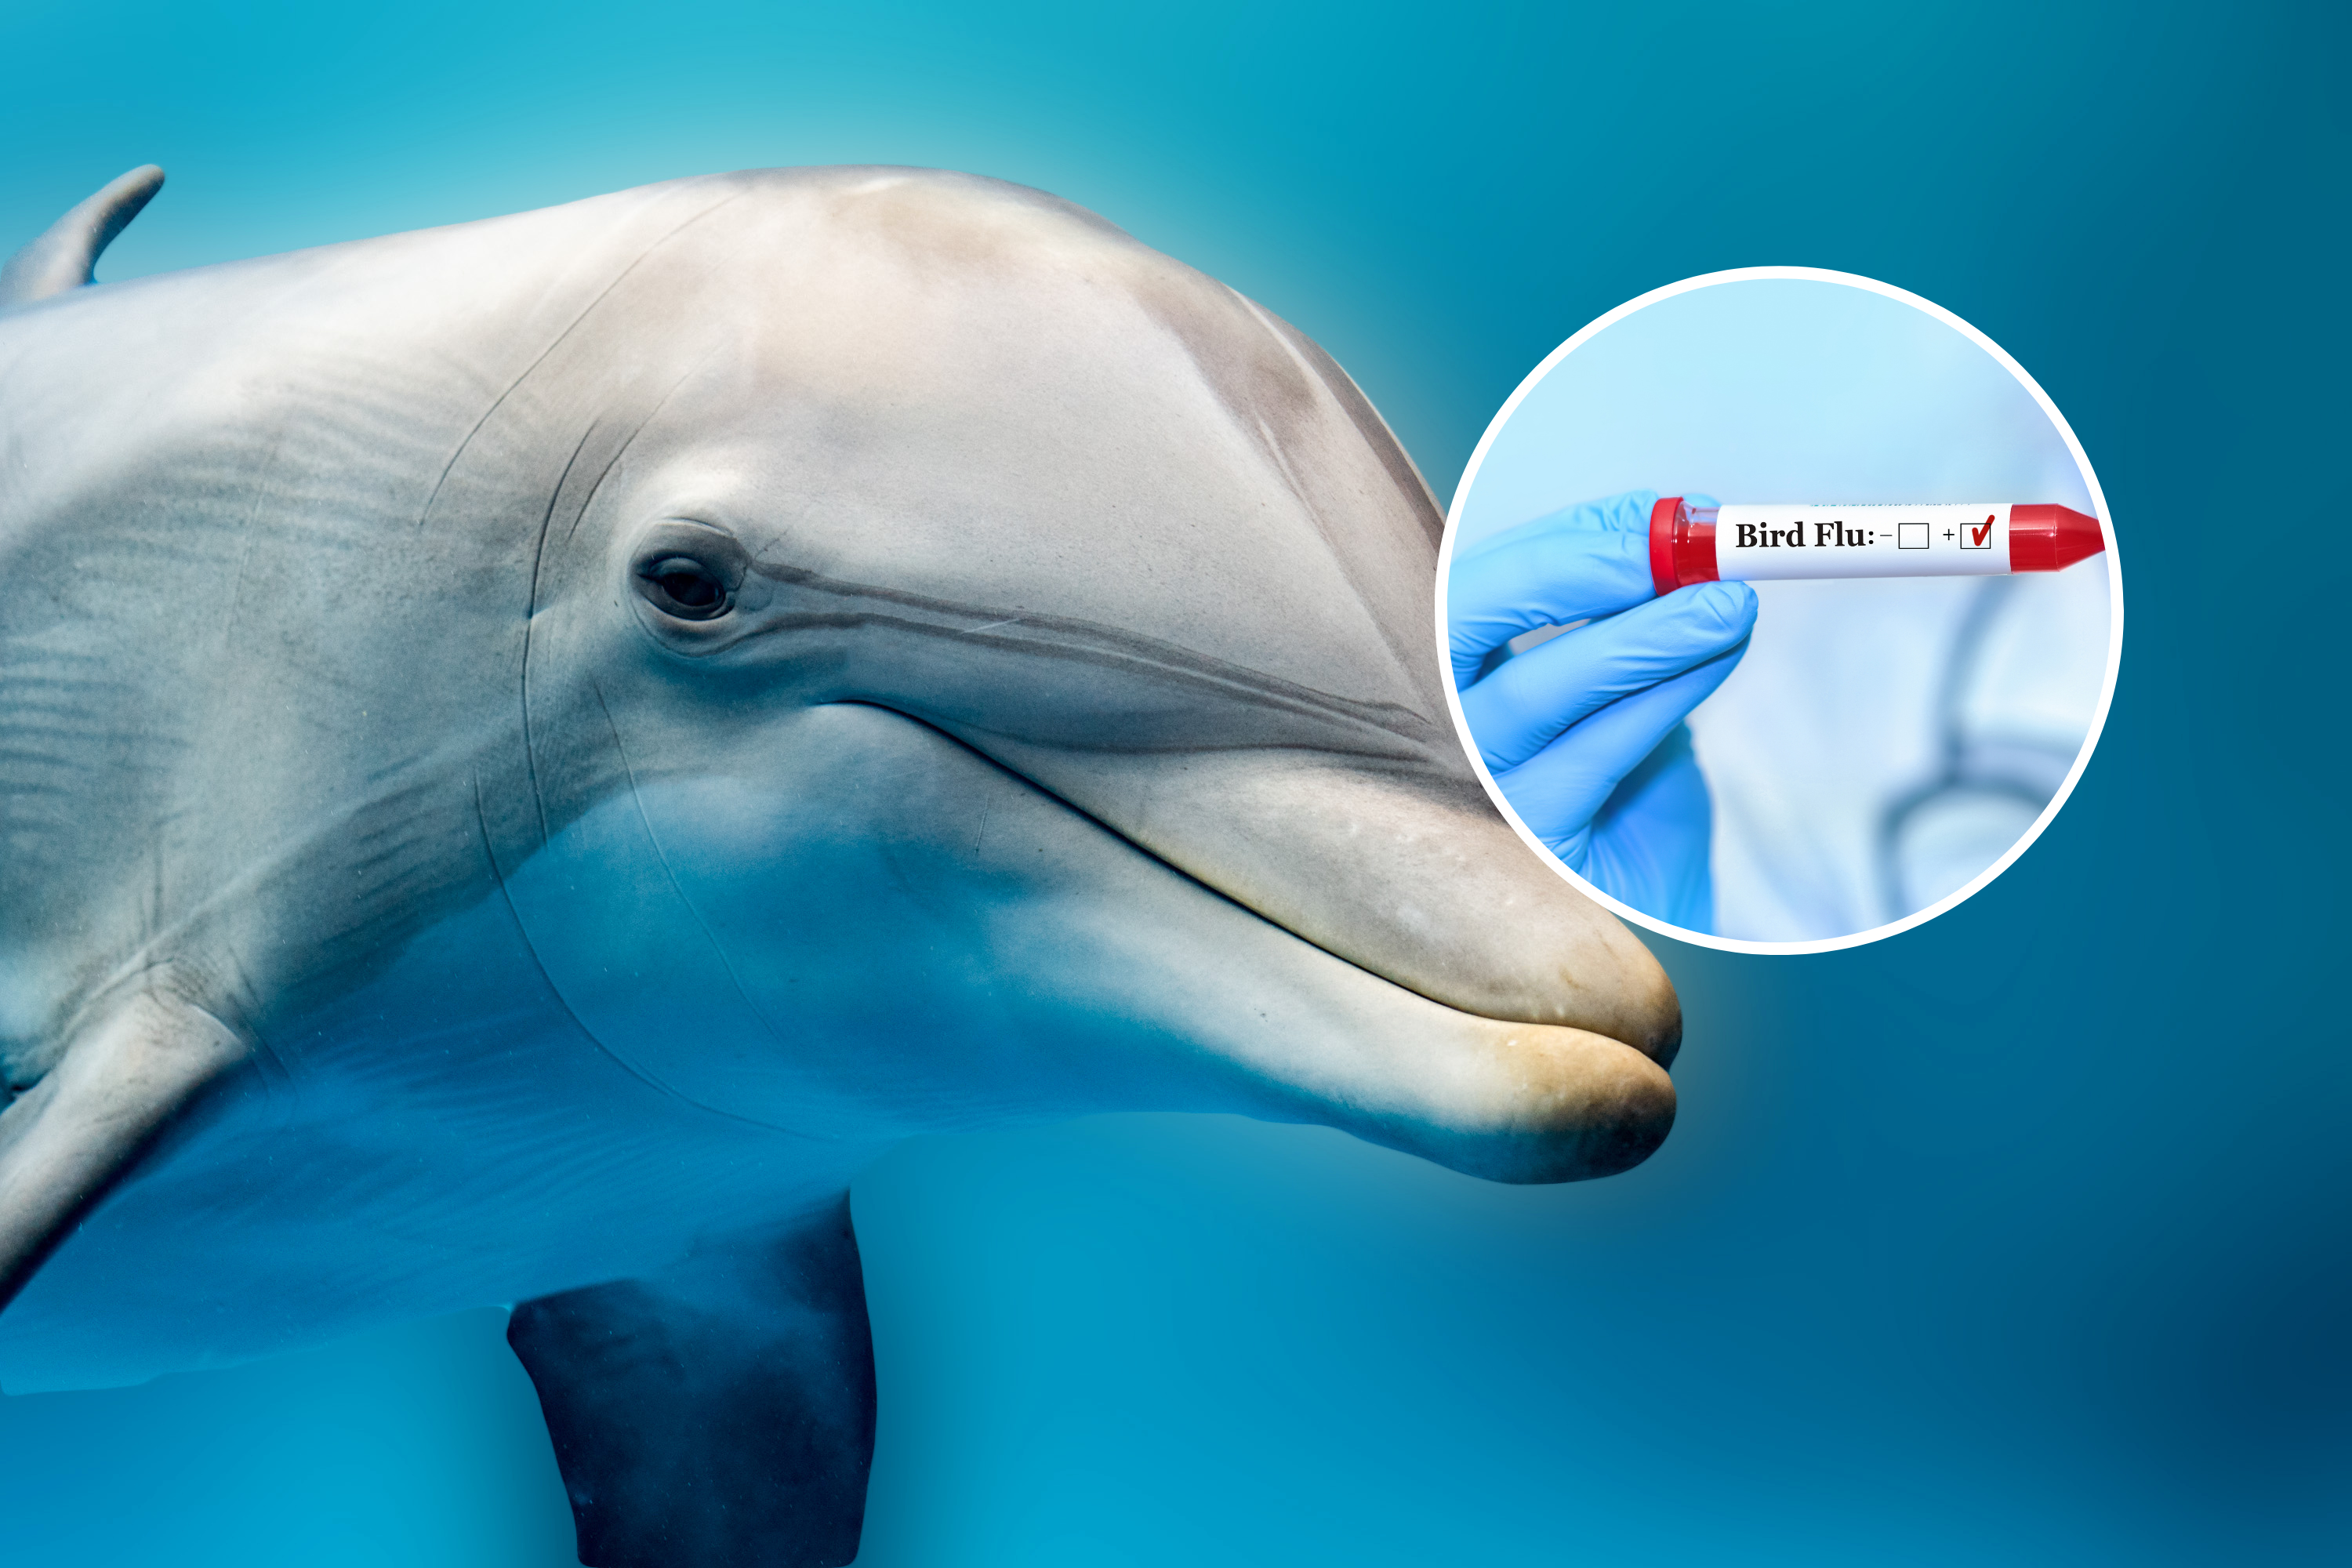 Warning as First American Dolphin Diagnosed With Highly Pathogenic Bird Flu [Video]